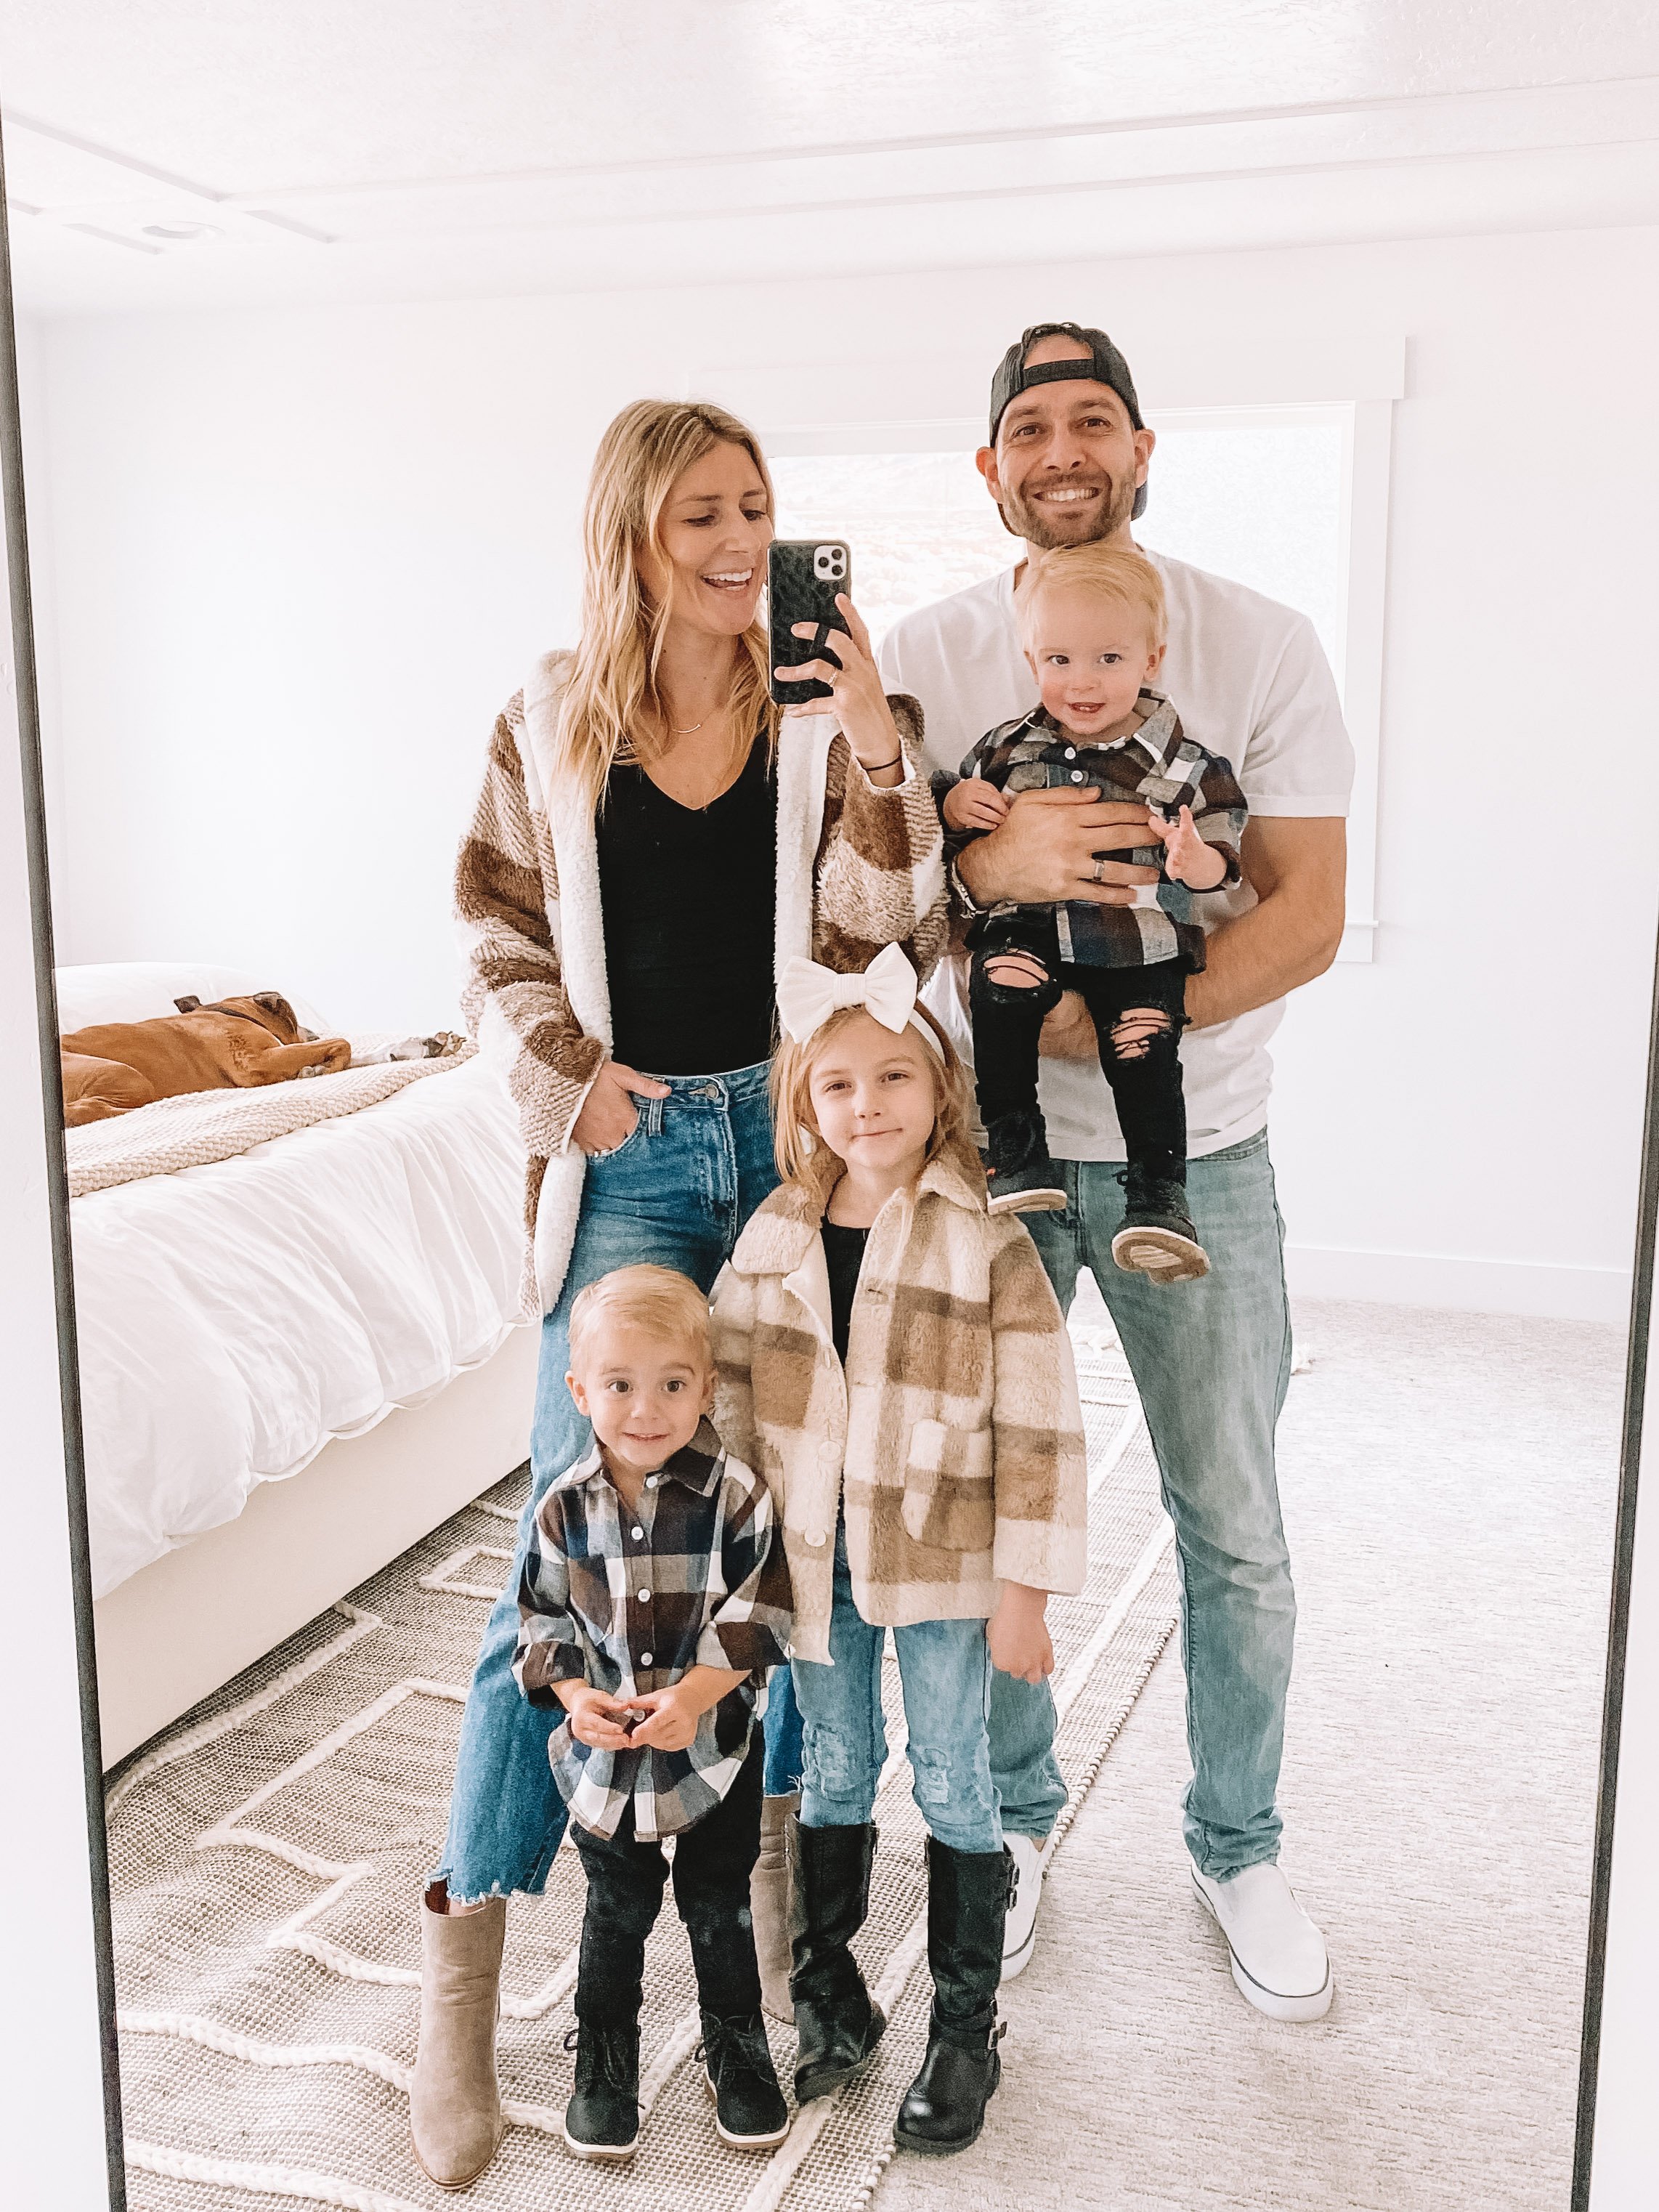 Matching Family Outfits in Plaid - The Overwhelmed Mommy Blogger